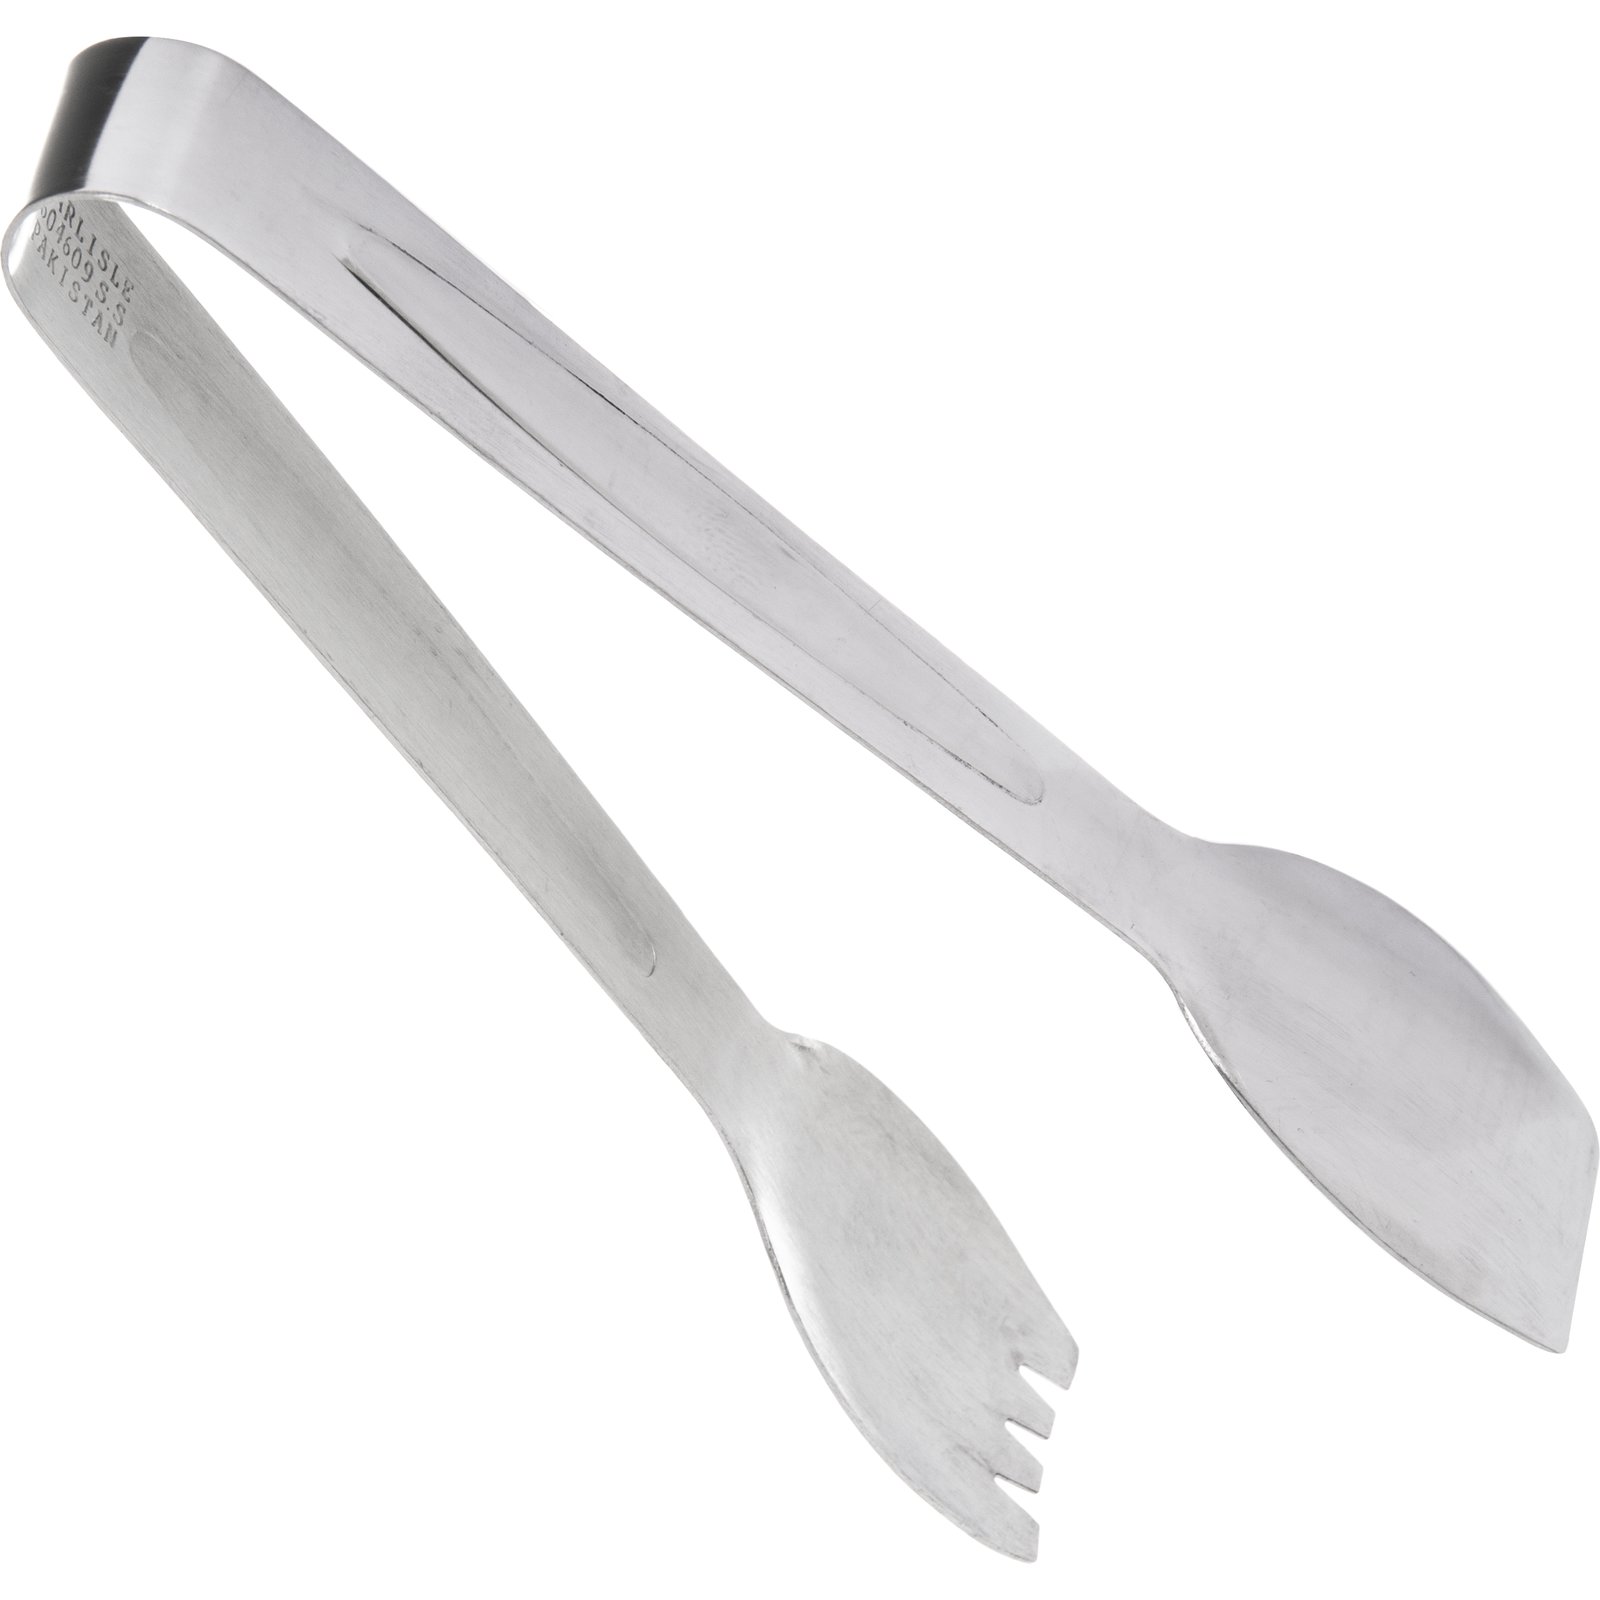 604609 - Aria™ Salad Tong 9 - Stainless Steel